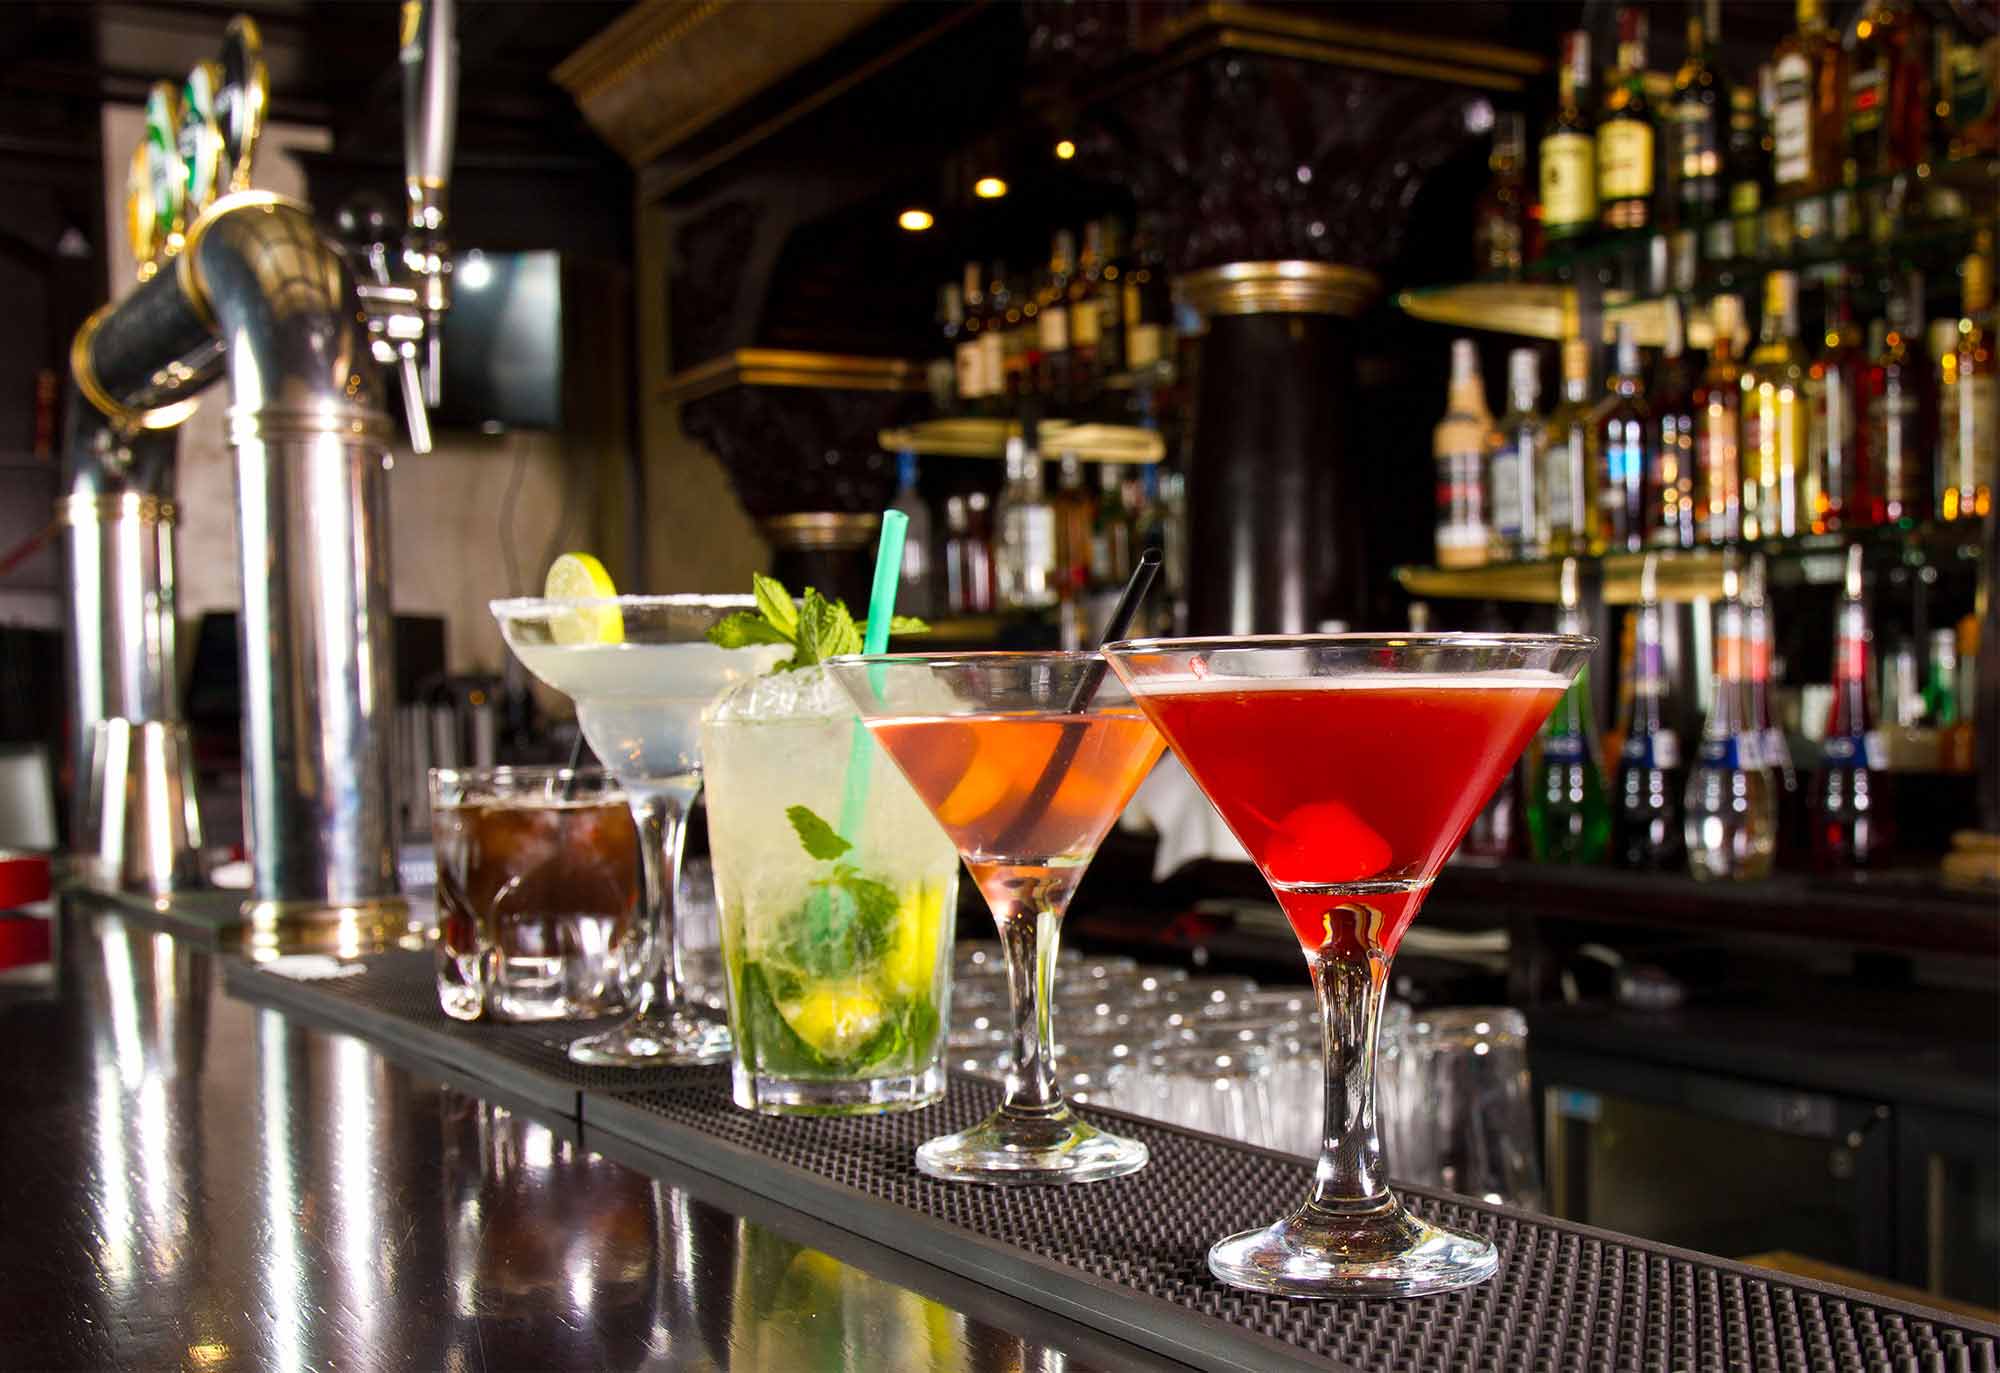 Top tips on putting together a drinks/bar menu